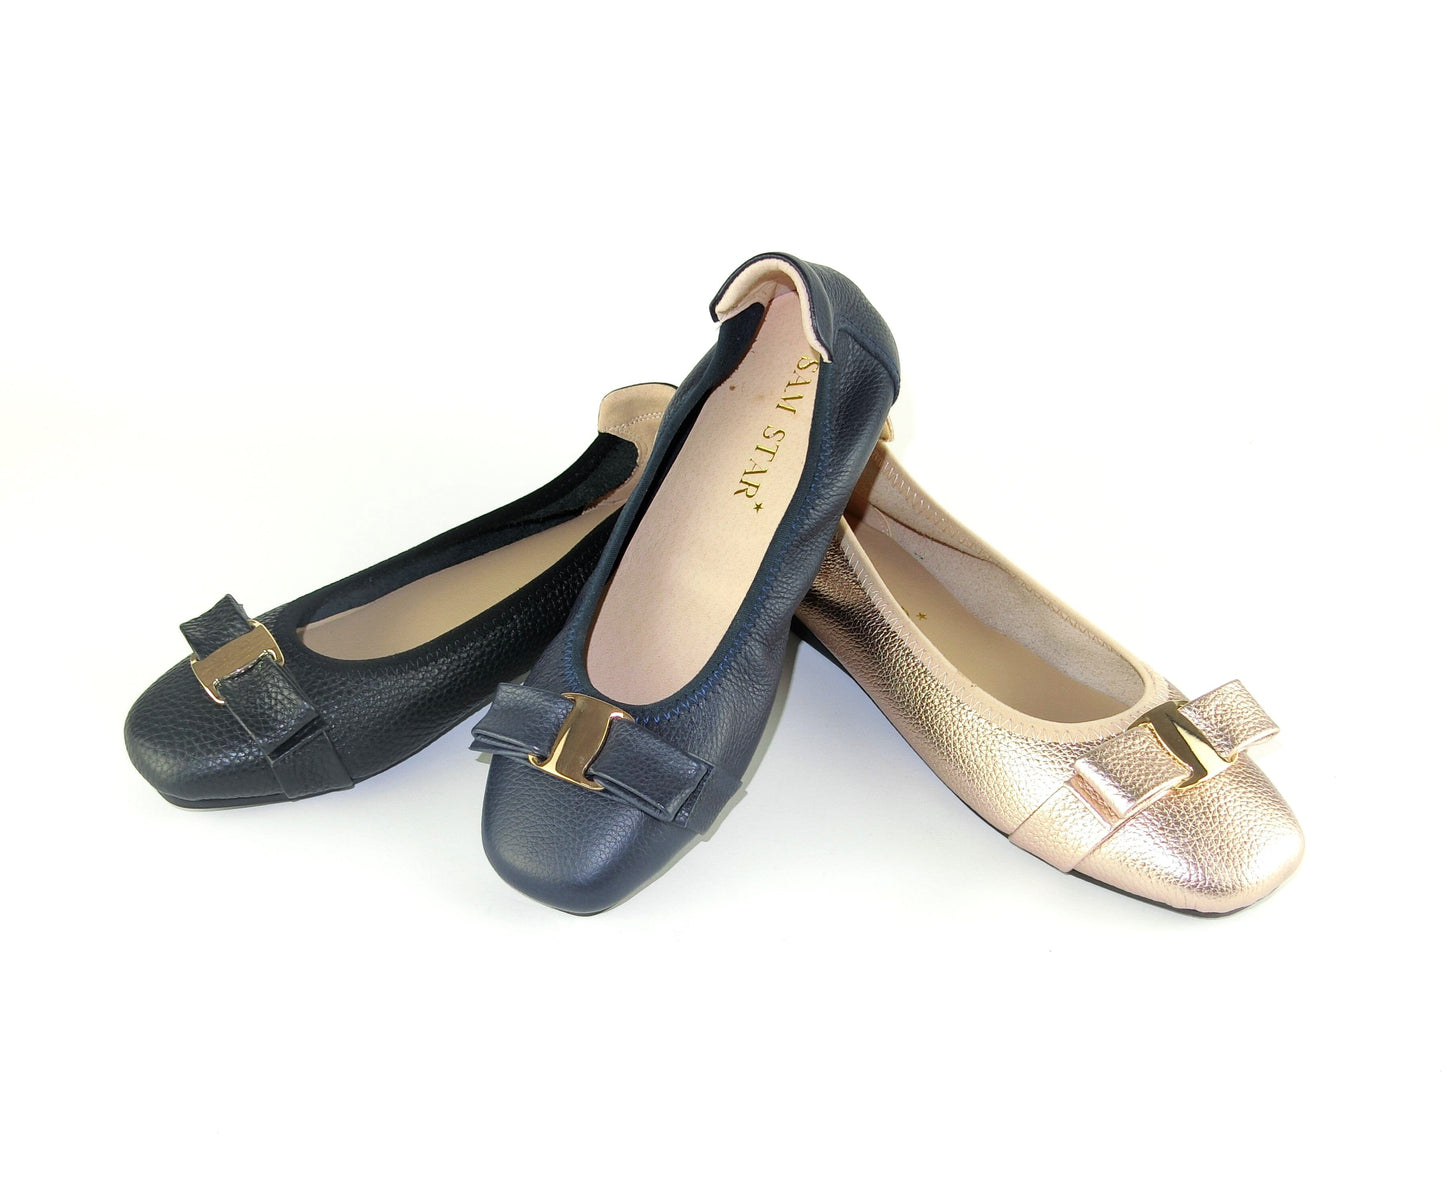 163-13 Leather pumps with gold buckle ( SALE ) Pumps Sam Star shoes 